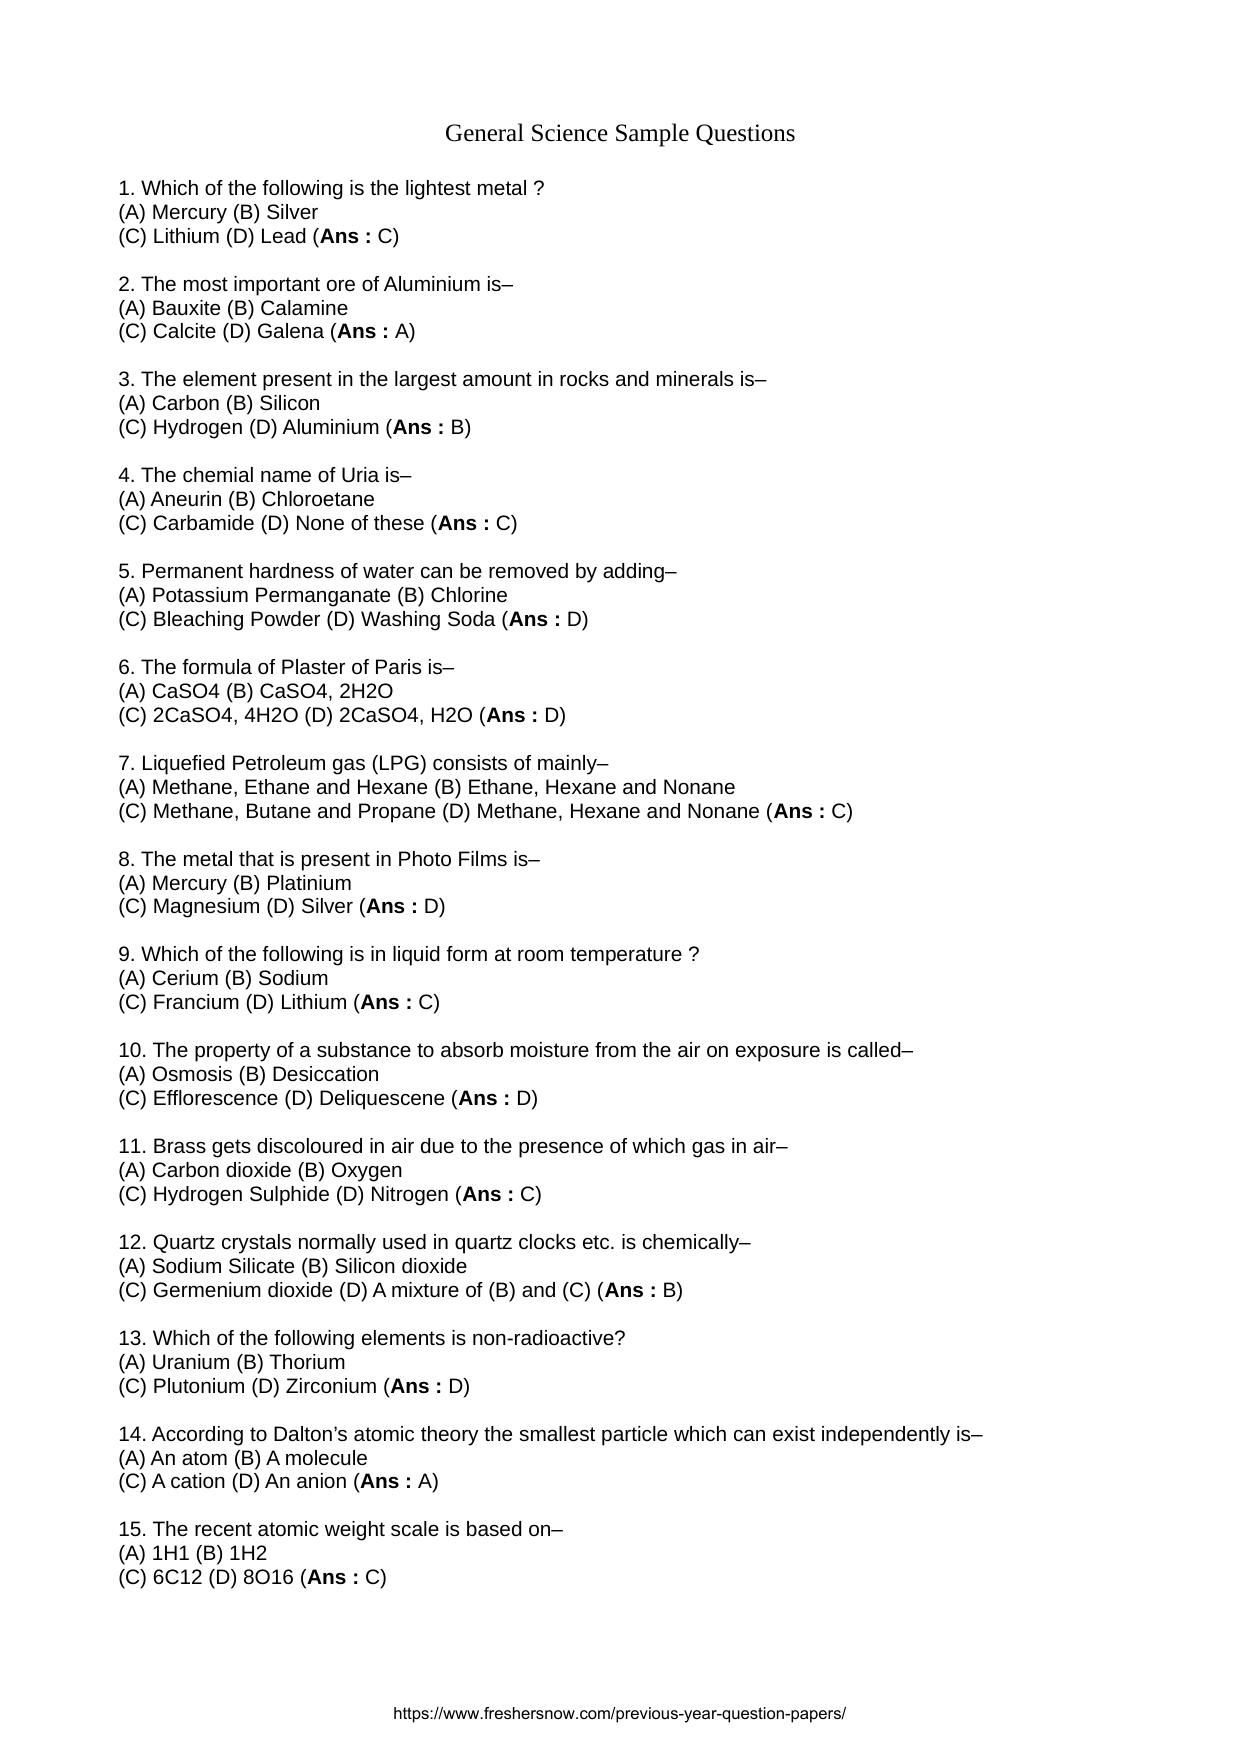 General Science Model Papers For Bihar Vidhan Parishad Exam - Page 1